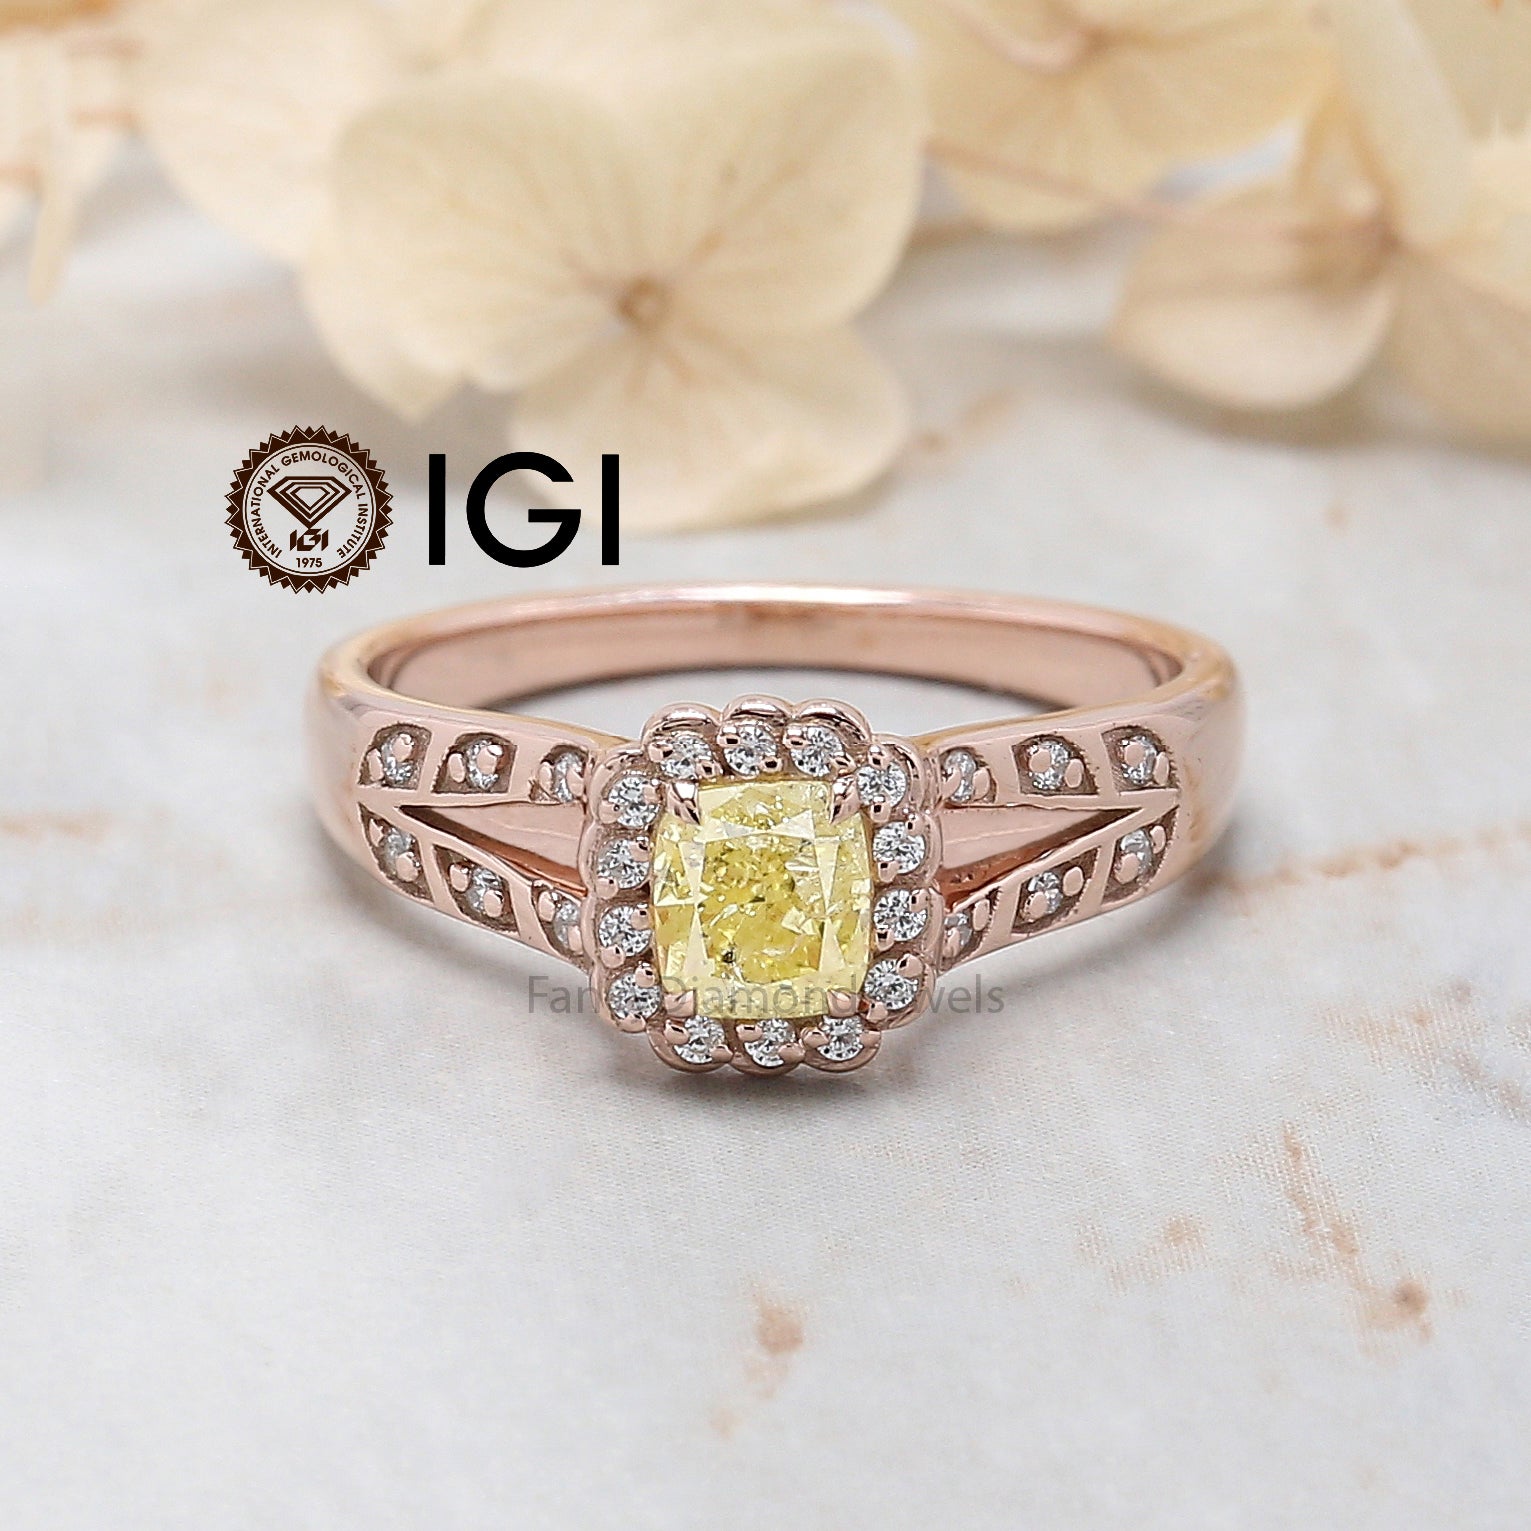 IGI Certified Cushion Yellow Color Diamond Ring 0.56 Ct 4.82 MM Cushion Diamond Ring 14K Solid Rose Gold Engagement Ring Gift For Her QL7701